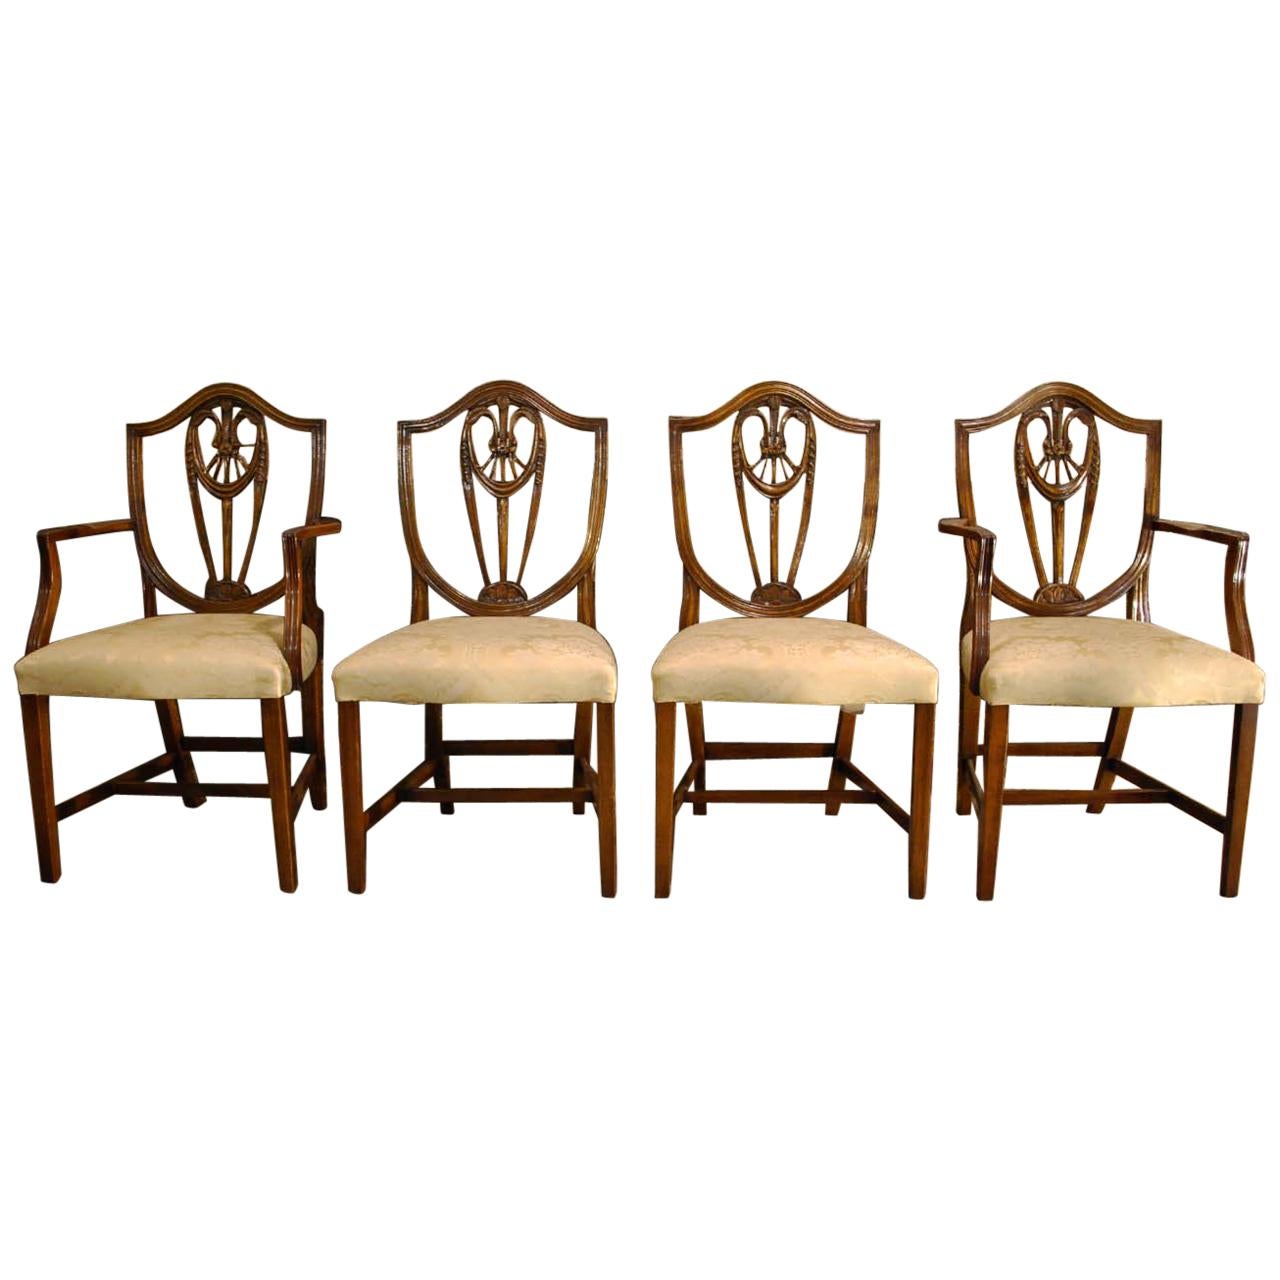 Four-Pieces Set Sheraton Style Bevan Funnel Reprodux Mahogany Dining Chairs